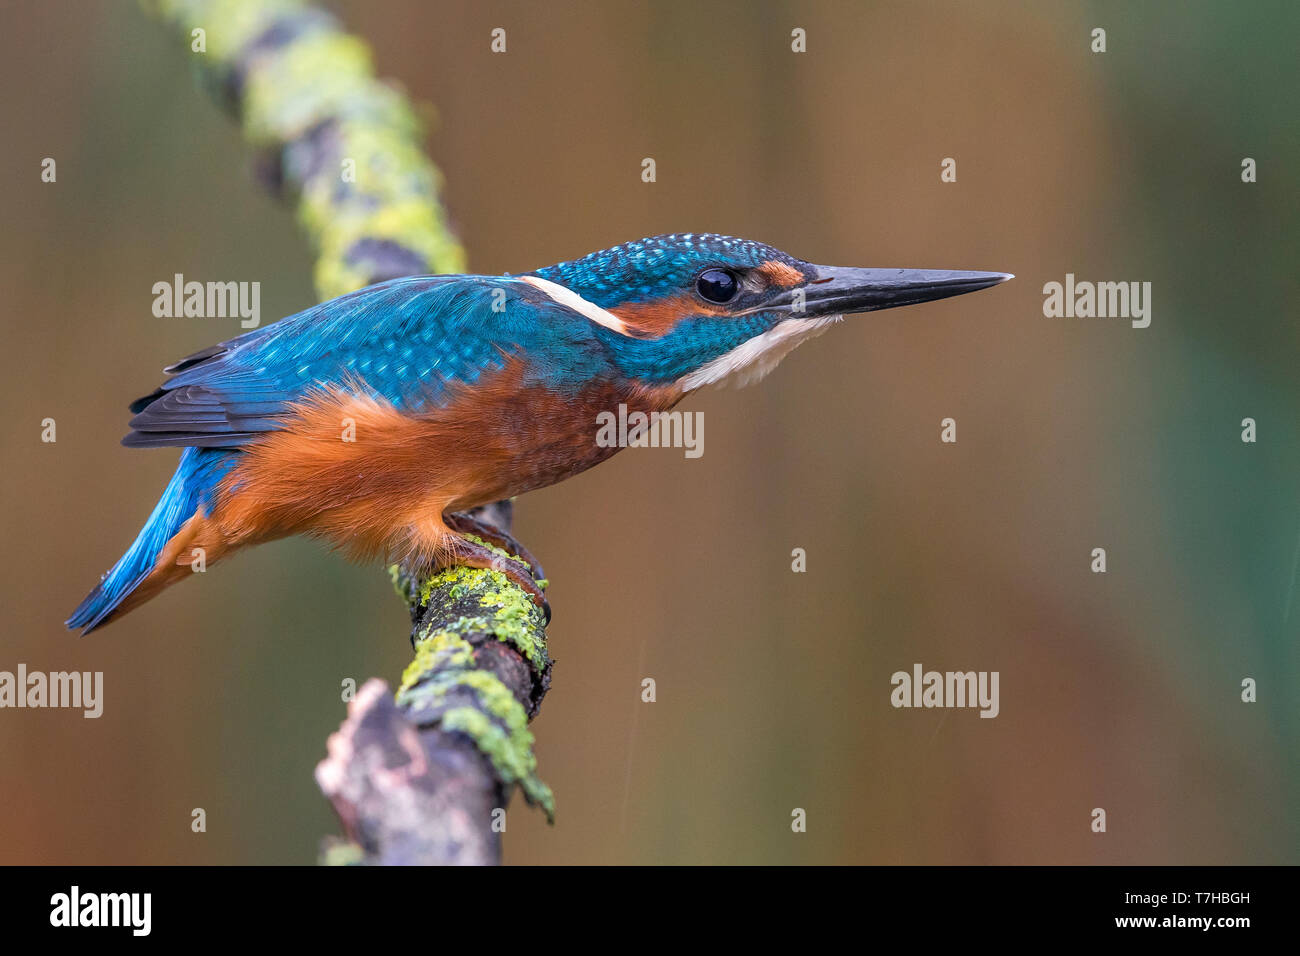 Kingfisher Alcedo atthis commun ; Banque D'Images